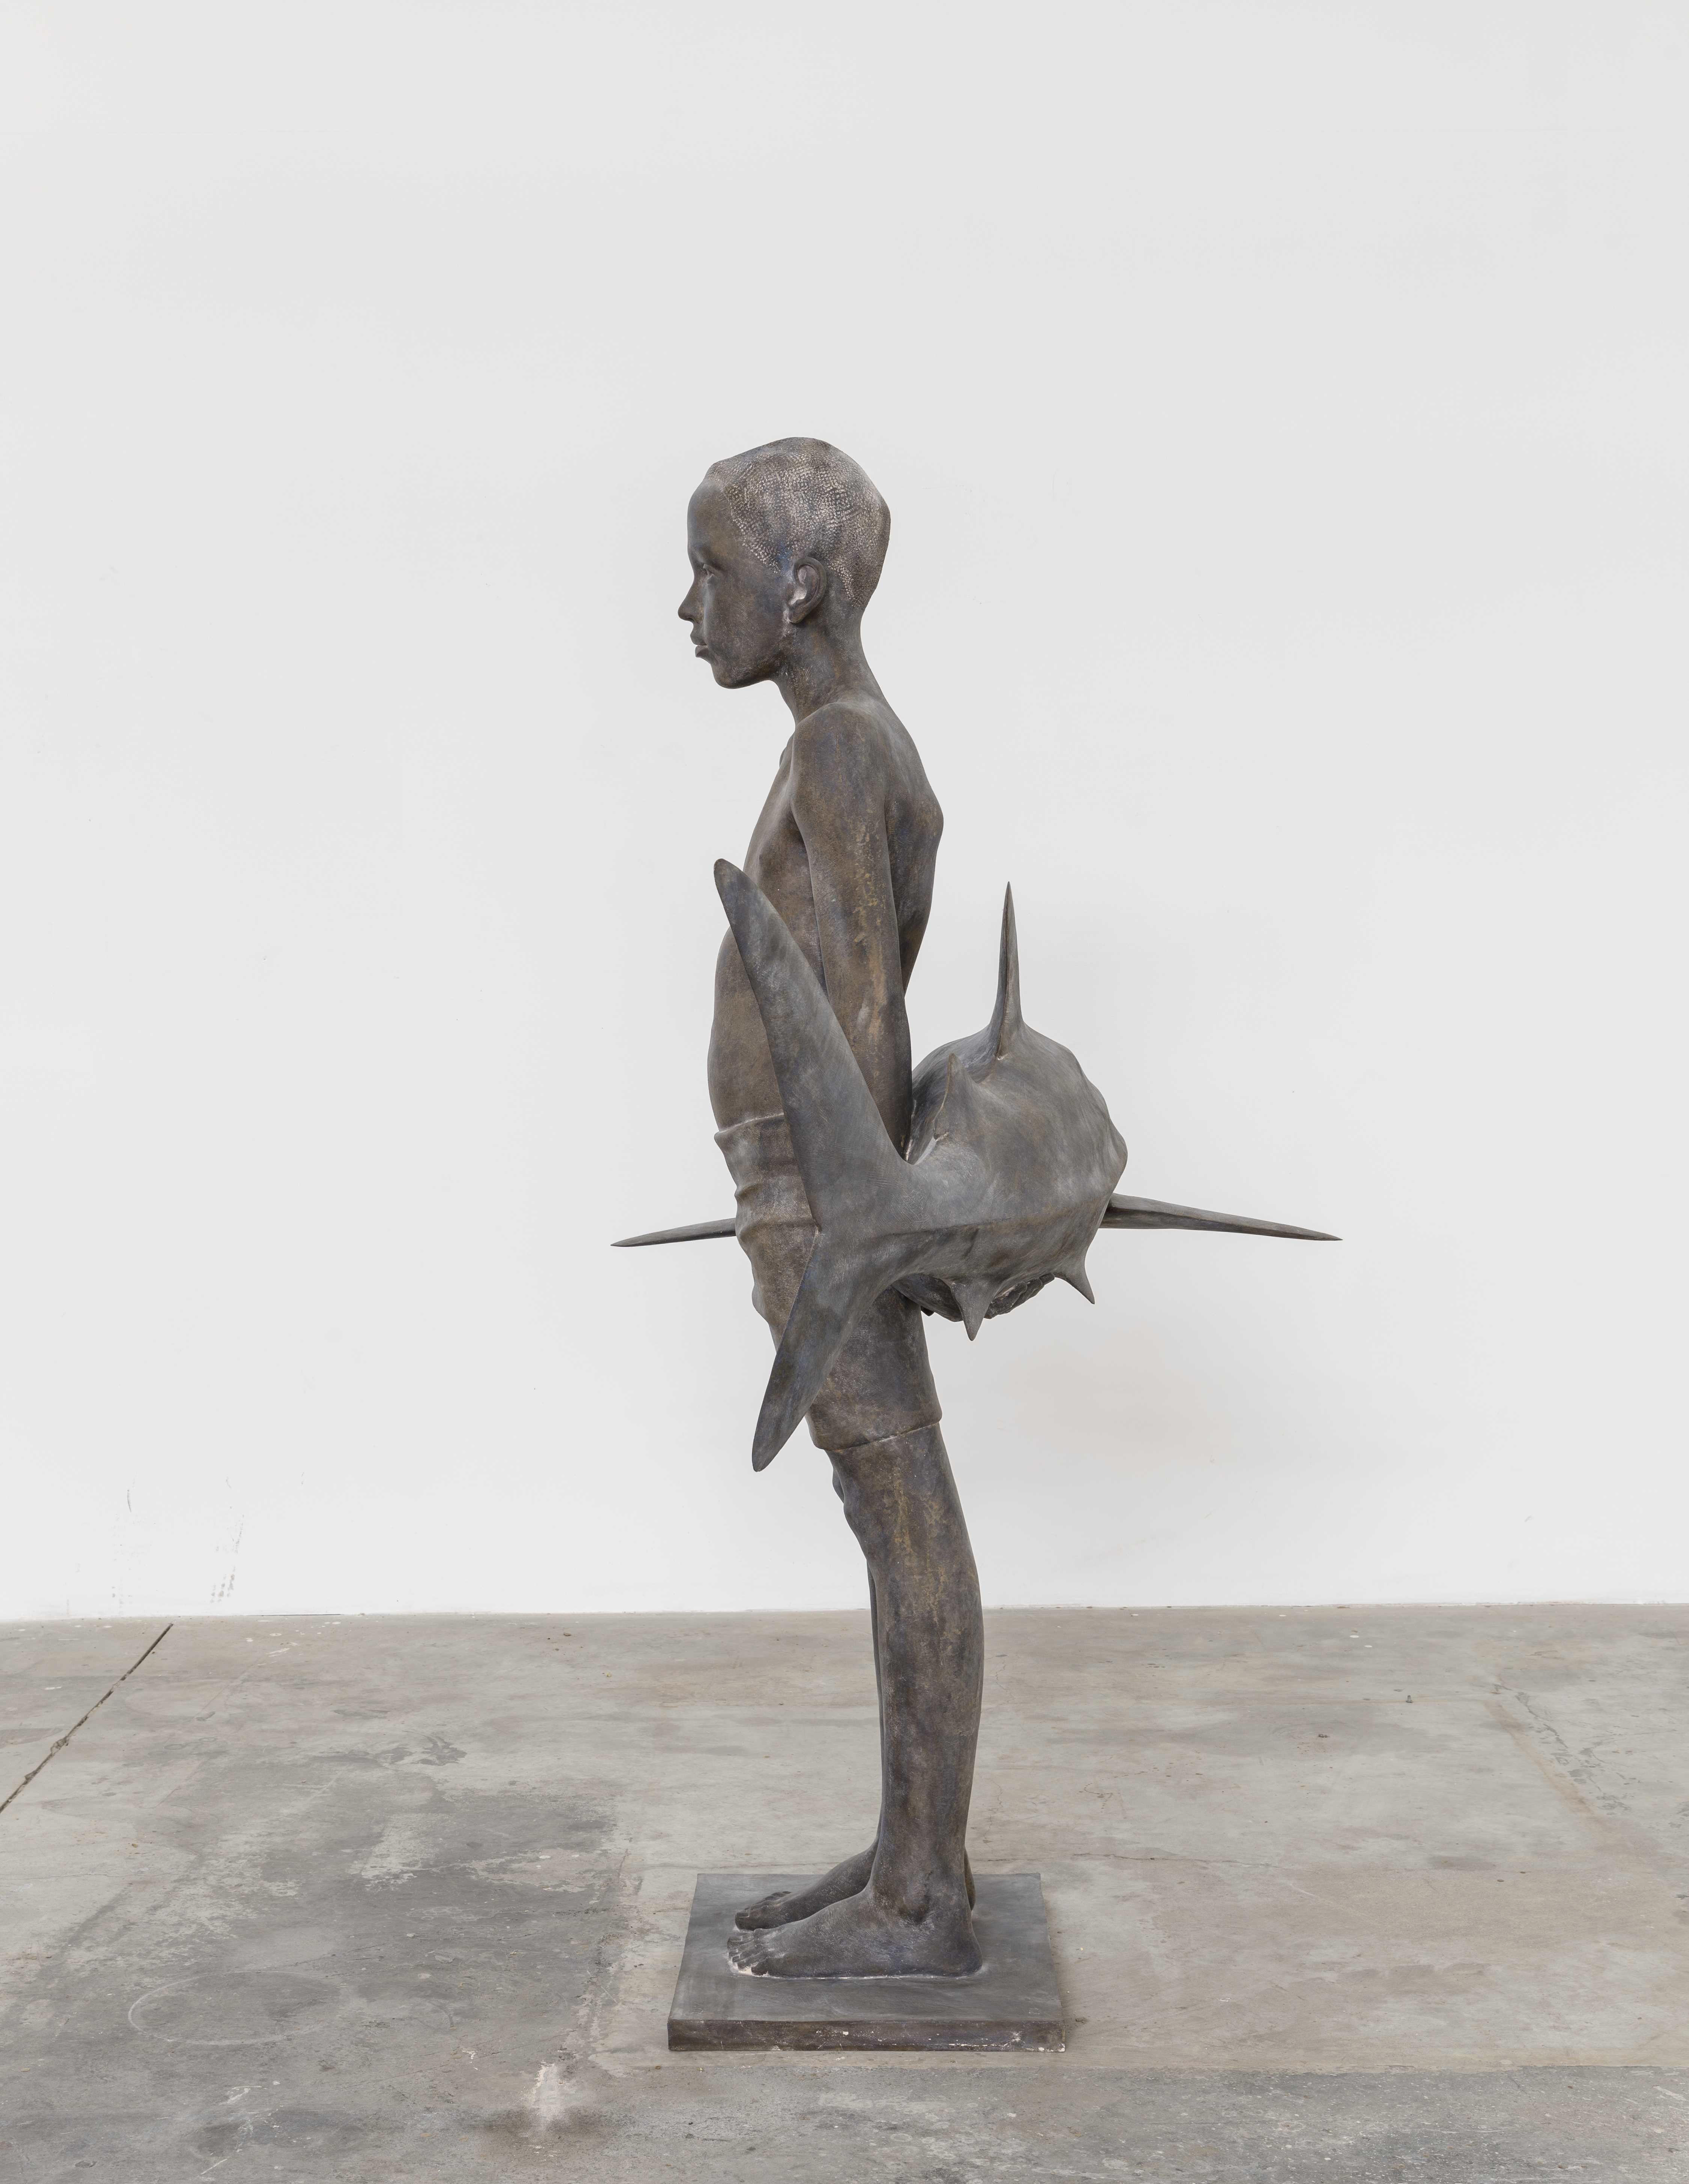 One of the most iconic pieces by the artist, the boy with the Shark, is in the biggest version.
Shown at Master Piece London in 2022, also one sculpture in Bond Street in London ( see images )
